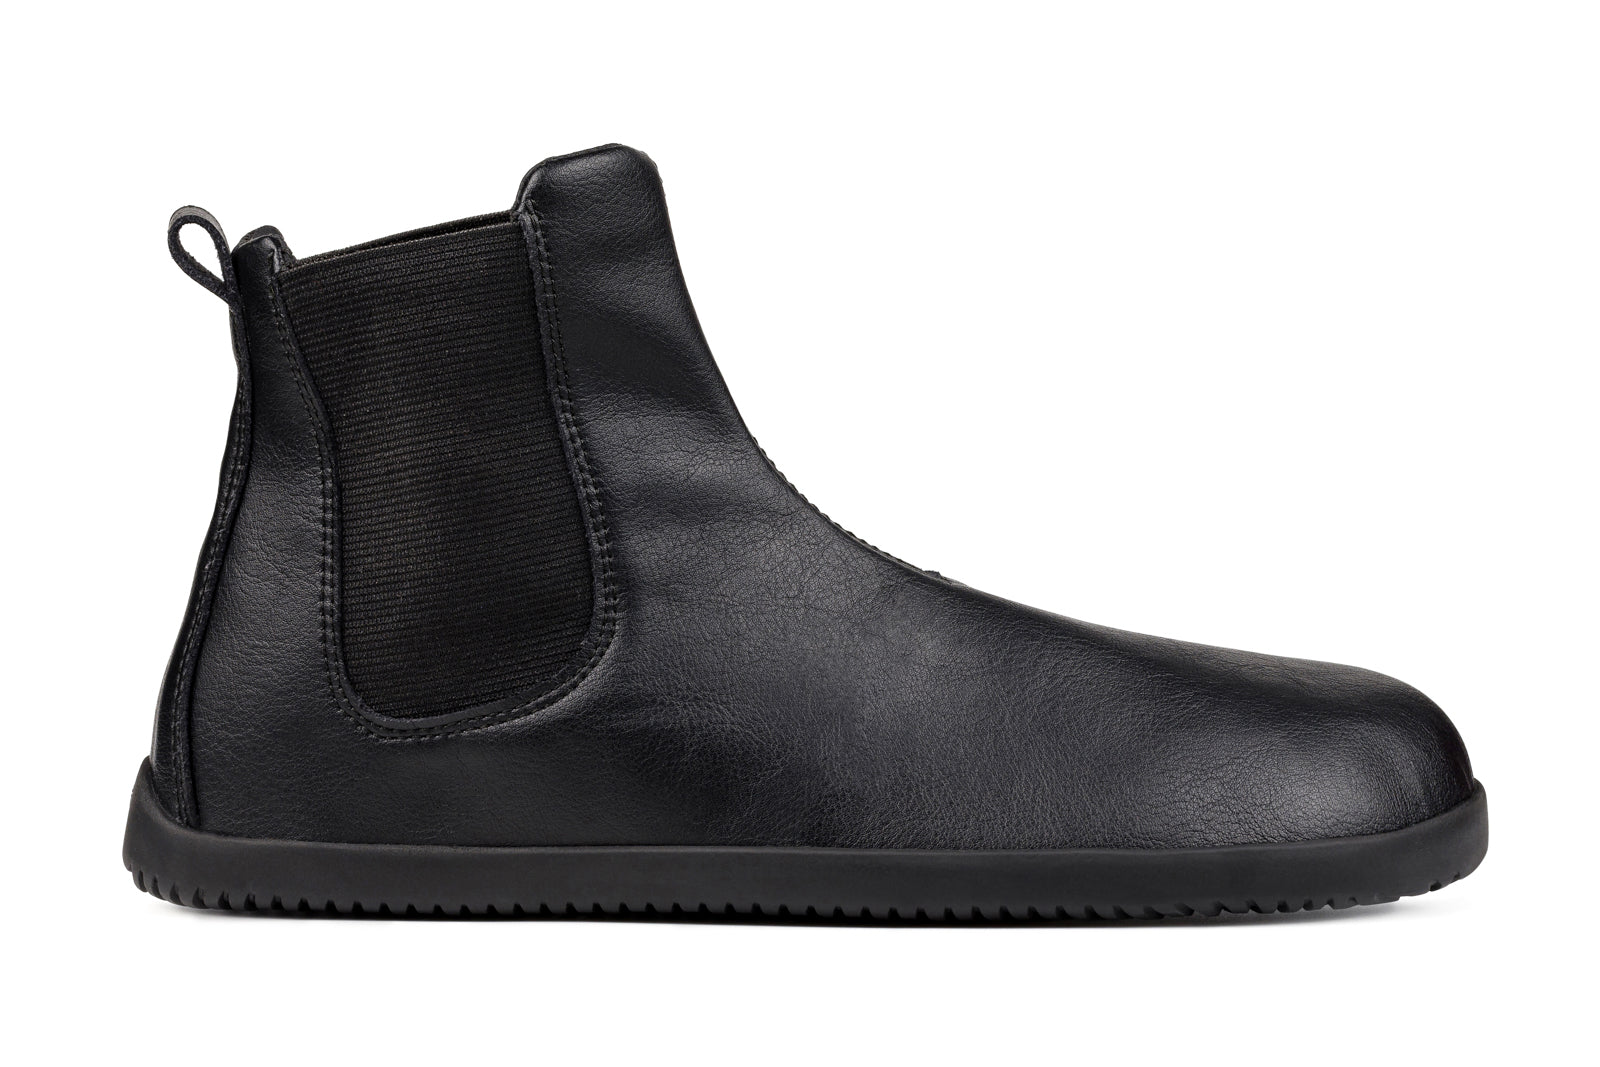 Tage med klo Happening Men's Chelsea barefoot black boots - IN STOCK | Ahinsa shoes 👣